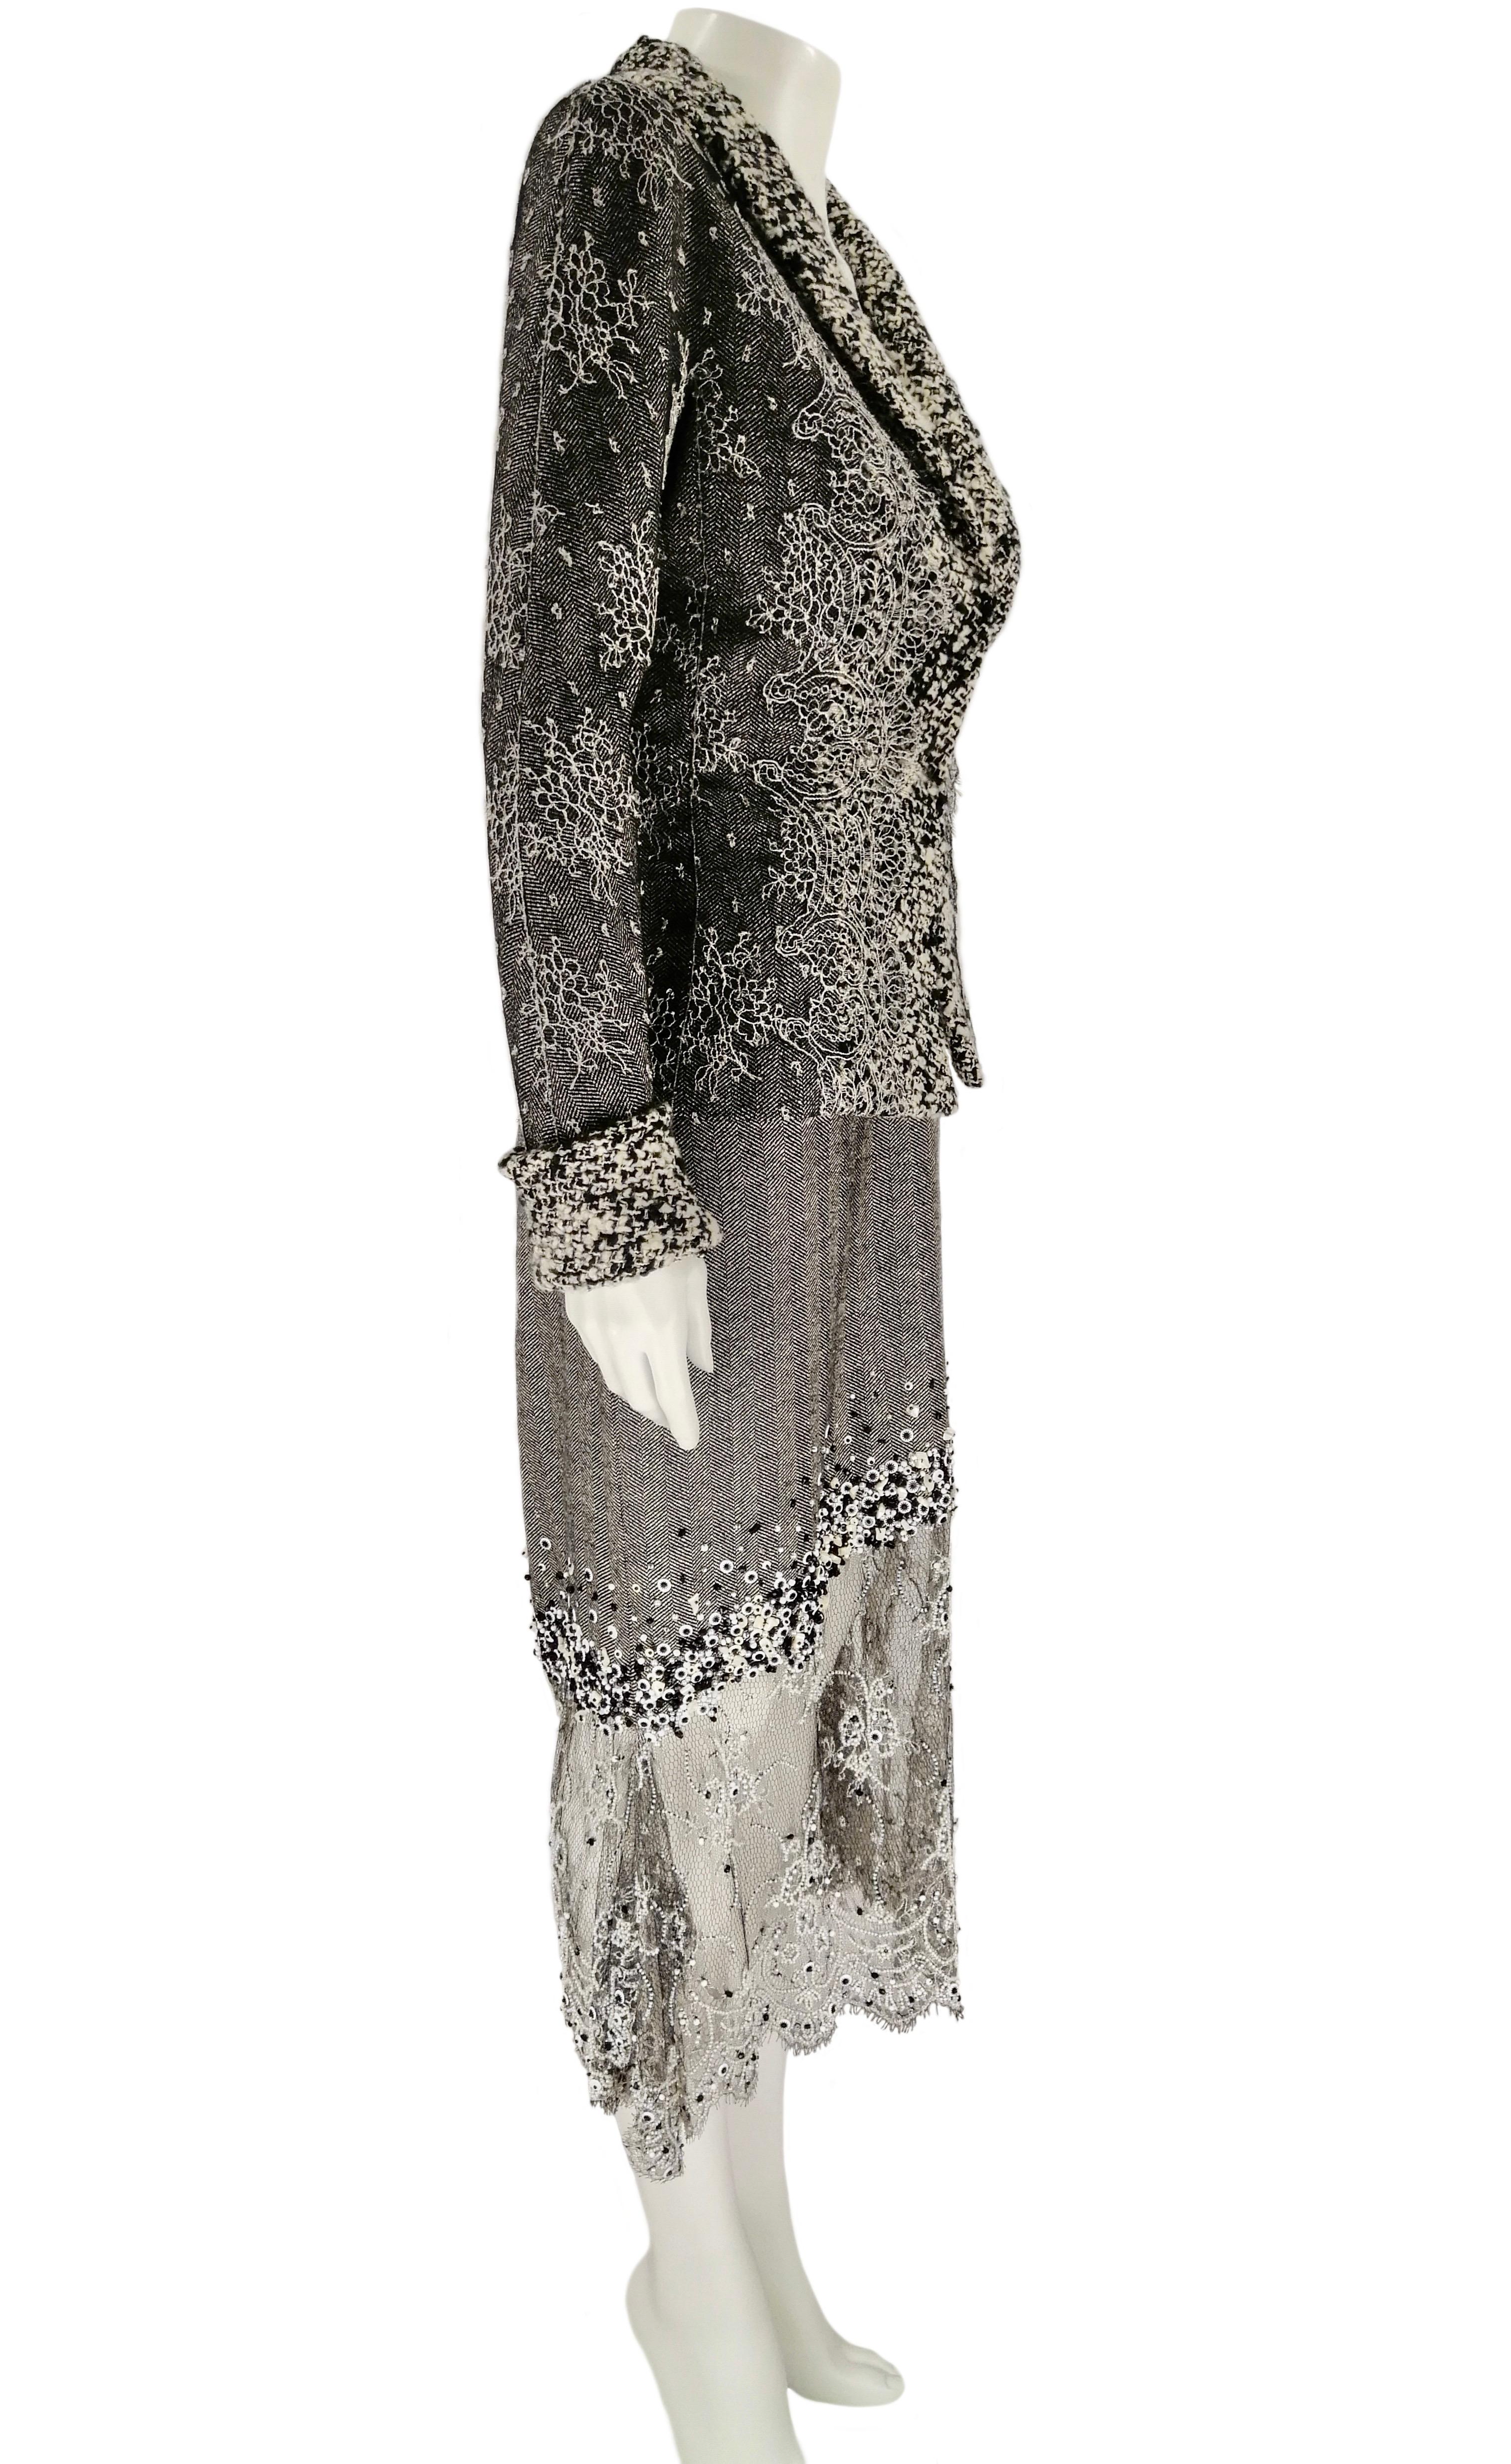 GIANFRANCO FERRÉ suit jacket and dress
Important  cocktail suit in black and white fish thorn wool fabric  with chantilly gray lace inlays embroidered in some areas with beads, mother of pearls, jas and rhinestones.
Size IT 42
Made in